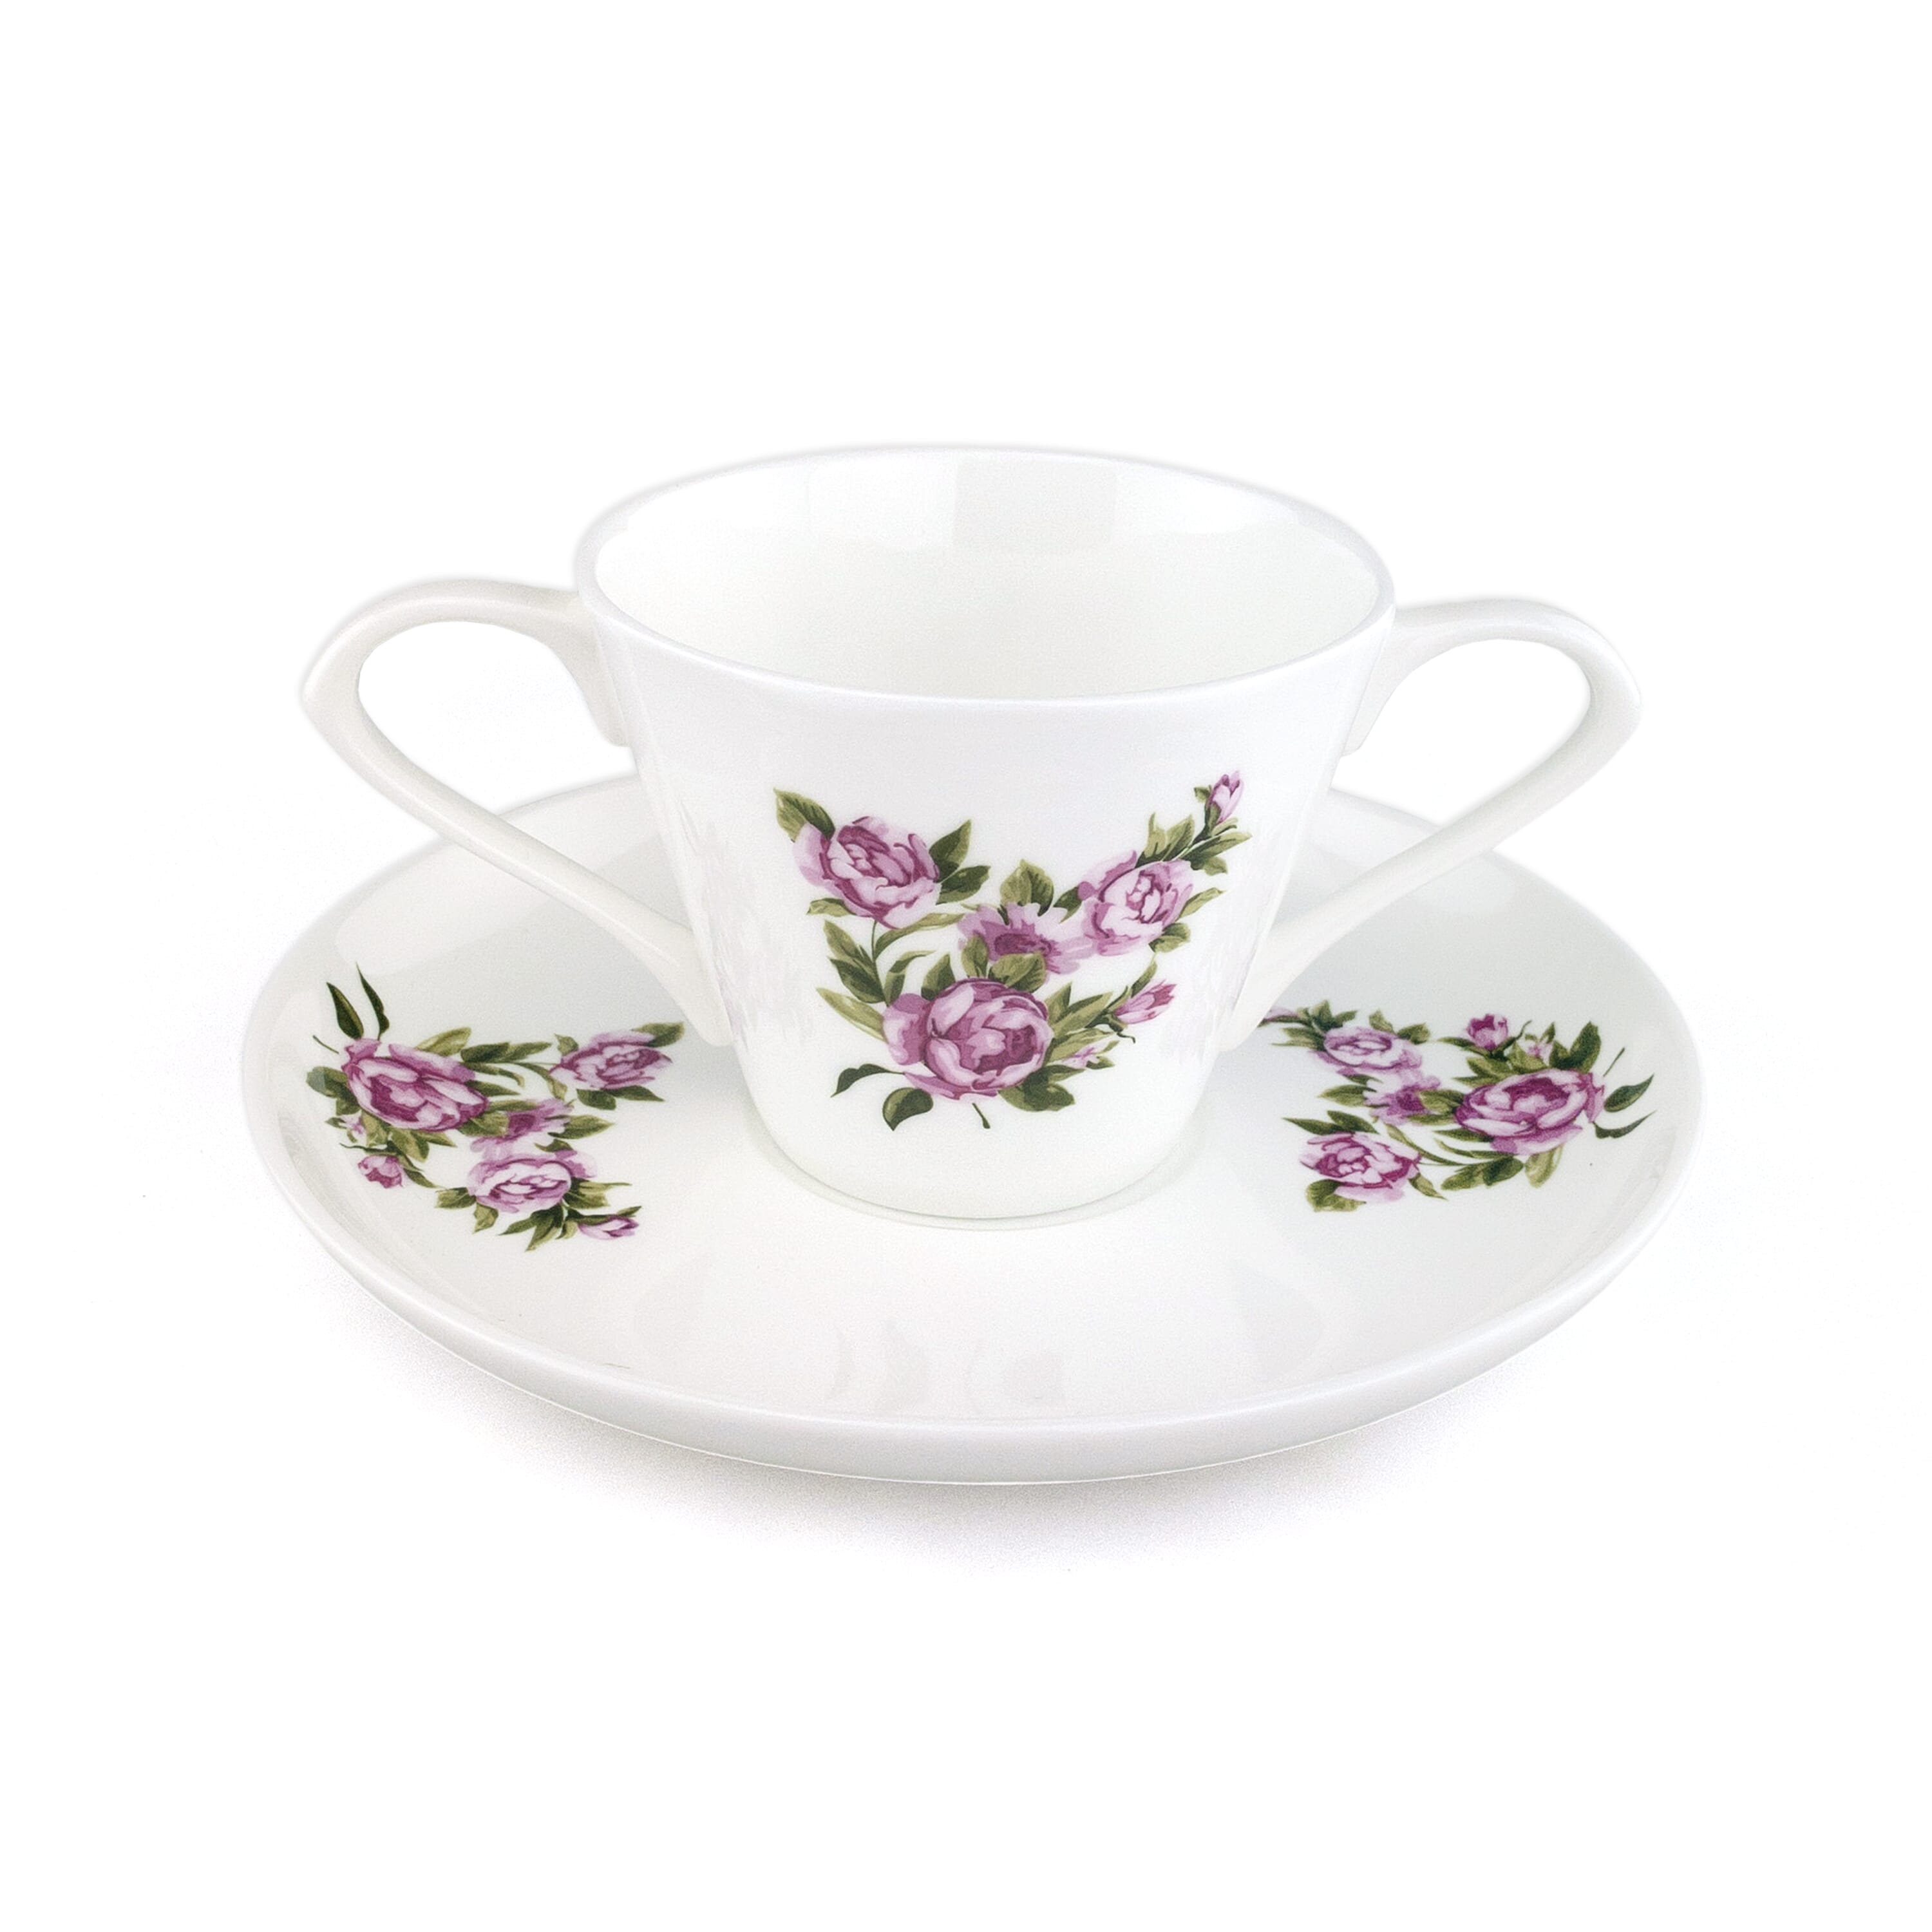 View DualHandle Bone China CupSaucer information